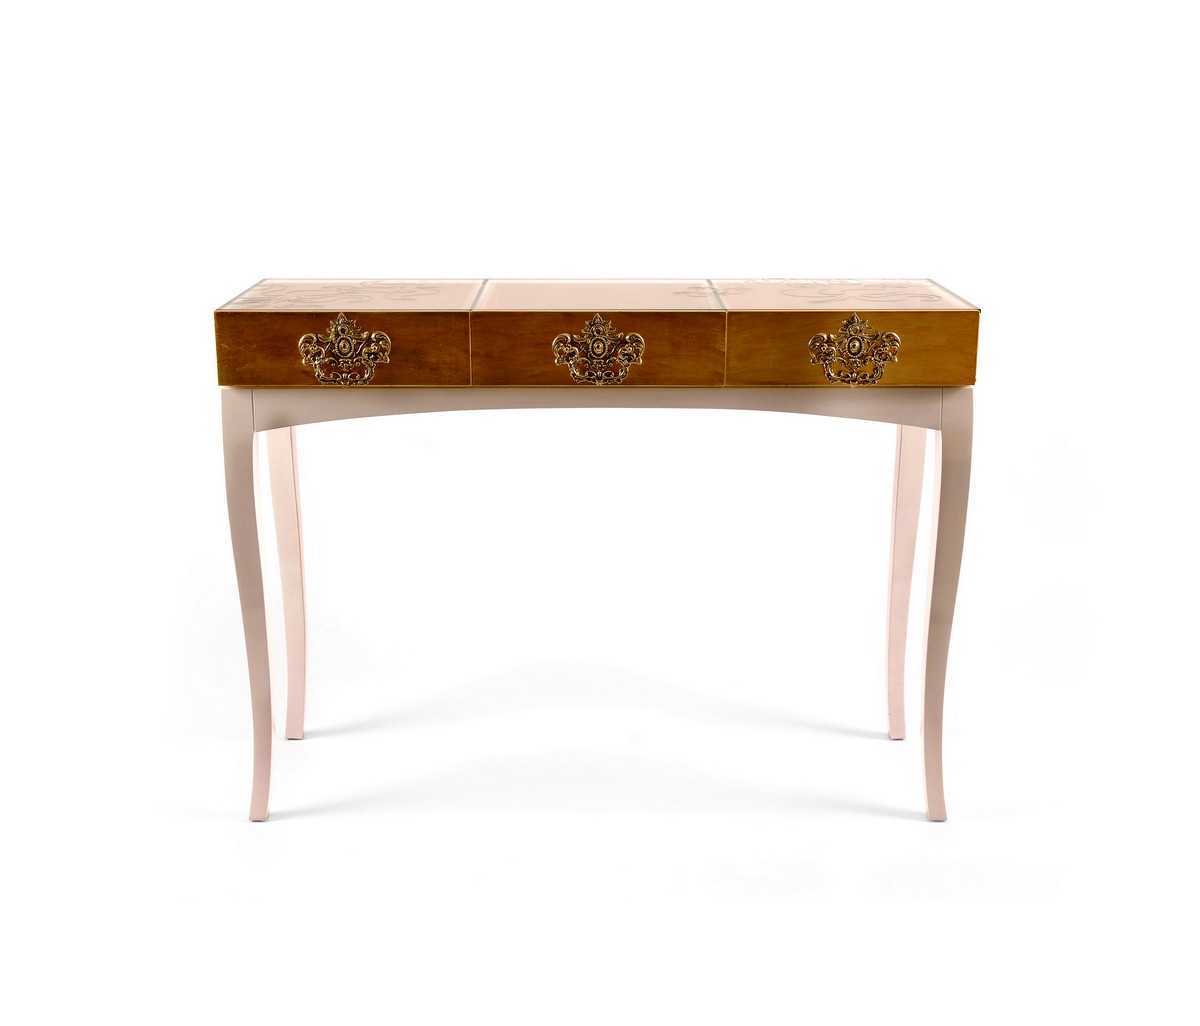 Victorian Console Tables with a Contemporary Vibe